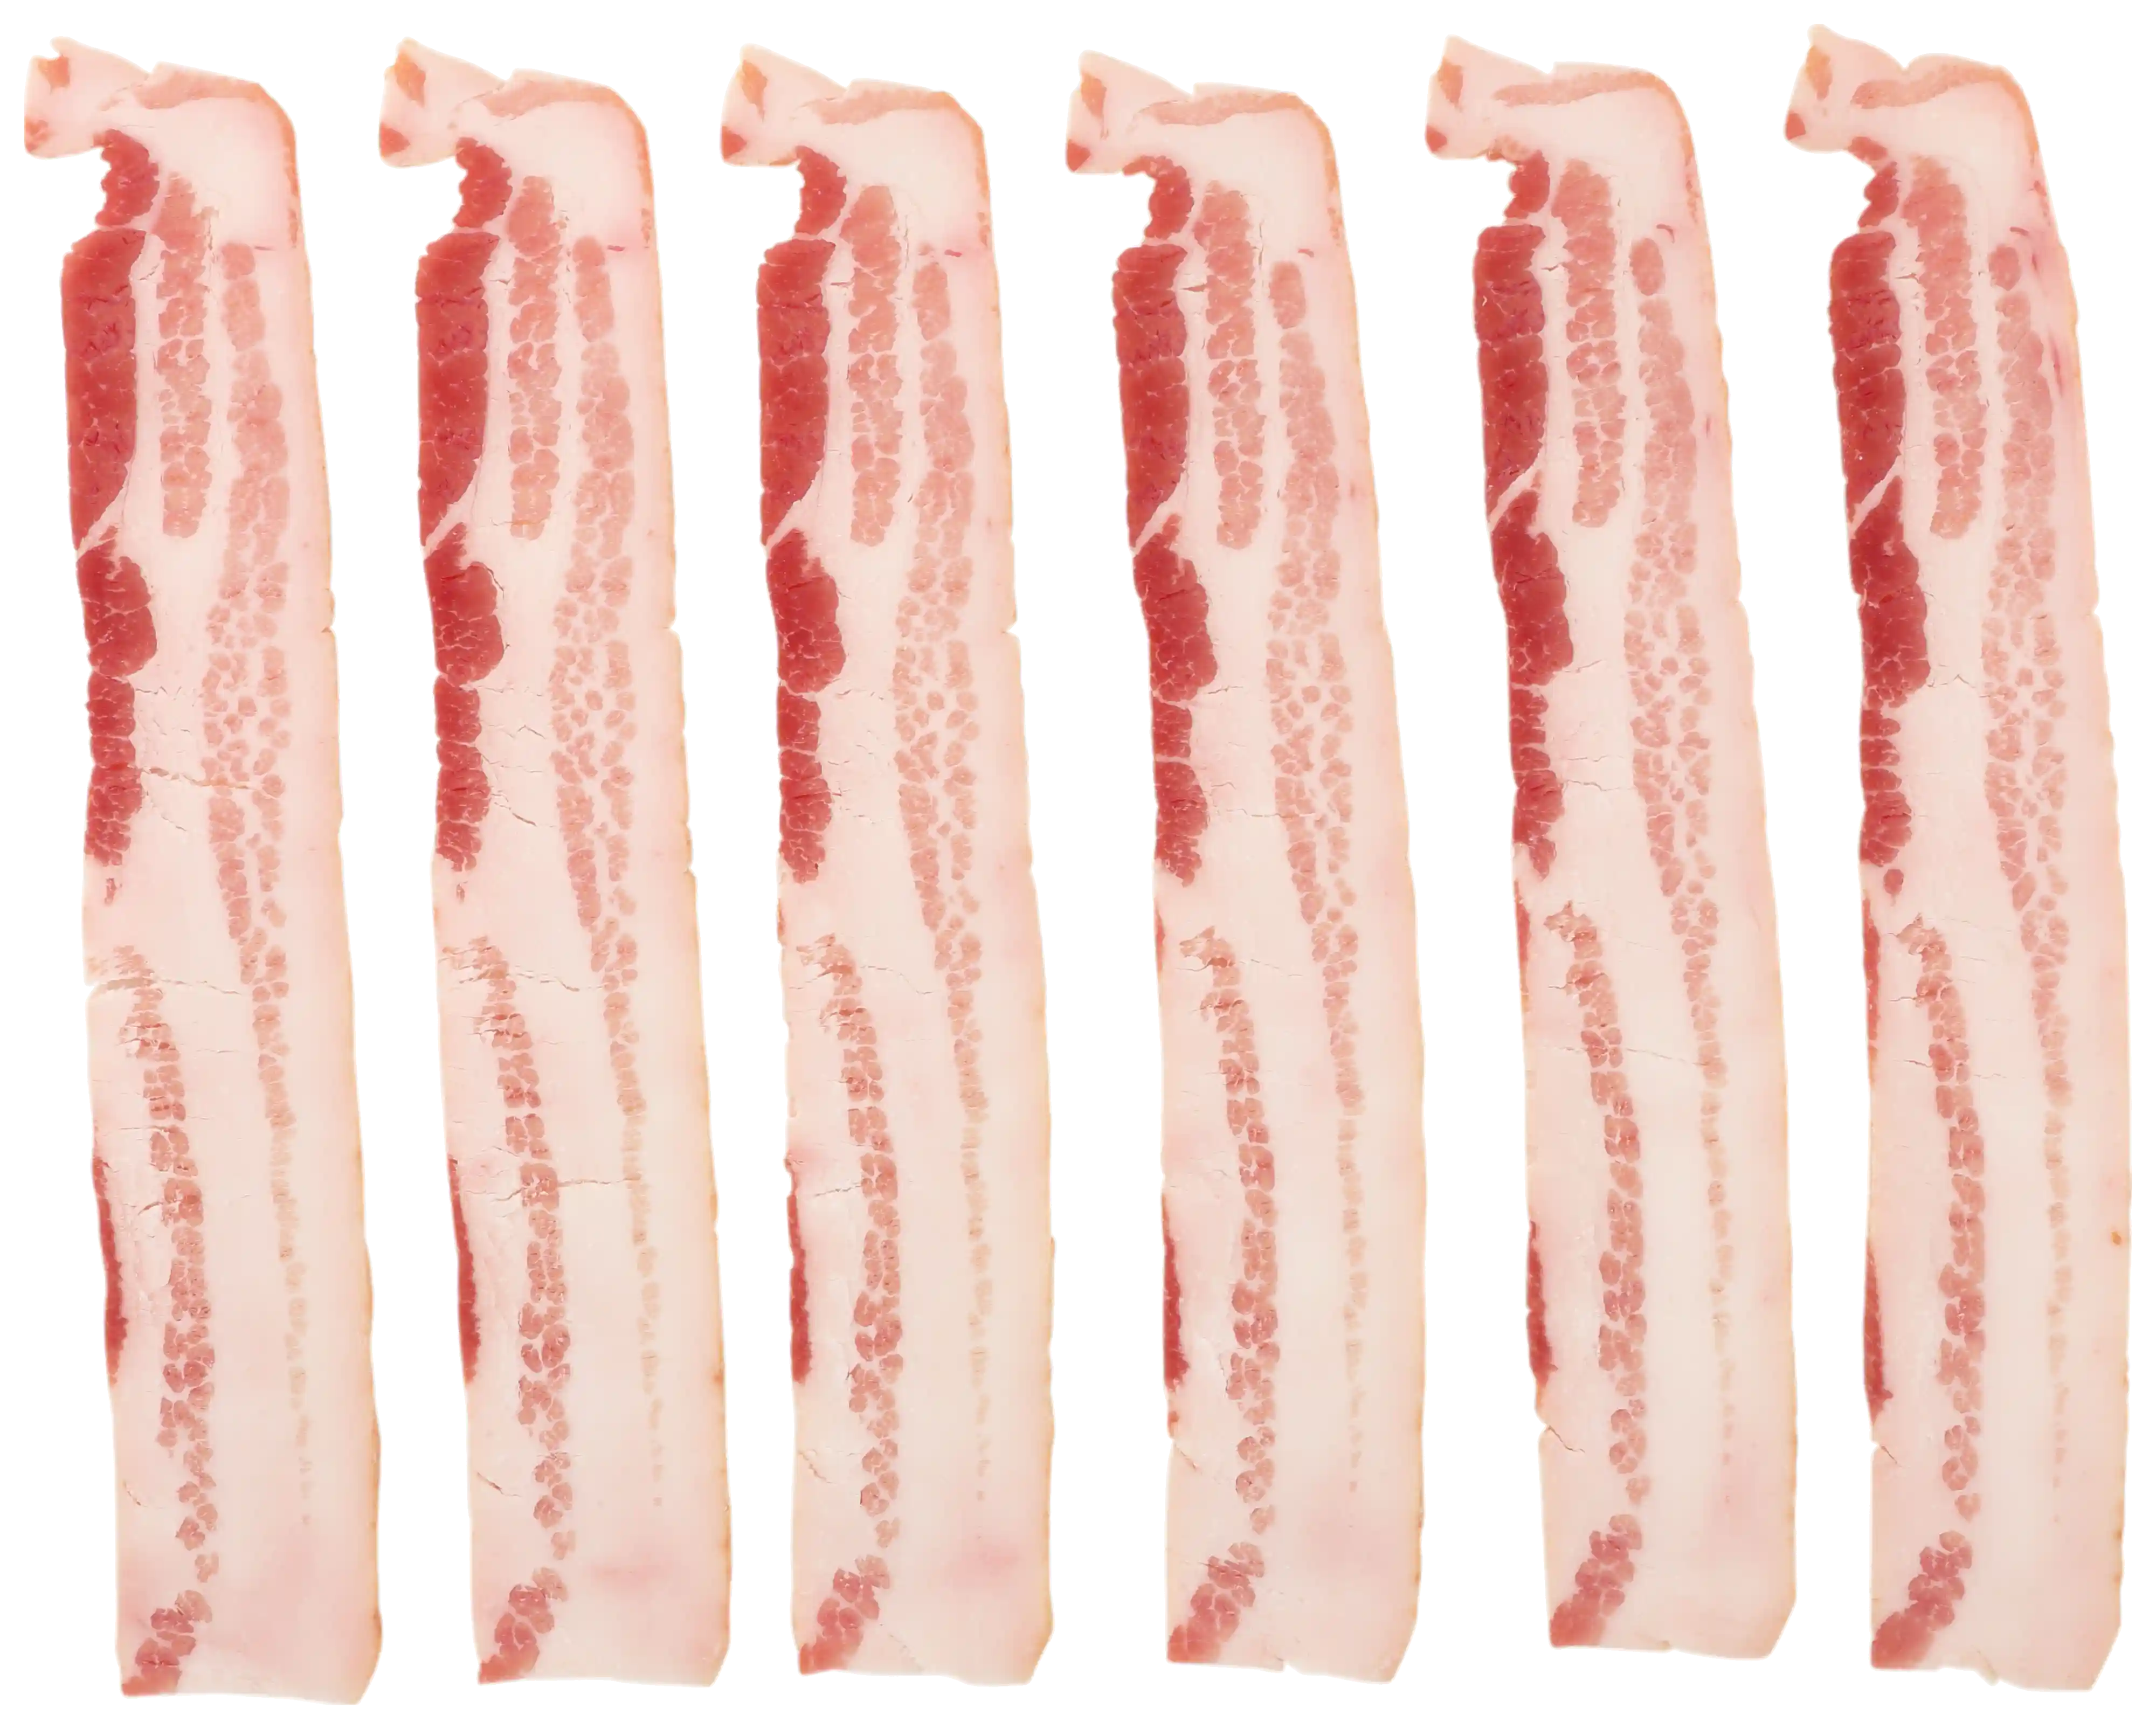 Wright® Brand Naturally Smoked Thick Sliced Bacon, Flat-Pack®, 10-14 Slices per Pound, Frozen_image_21